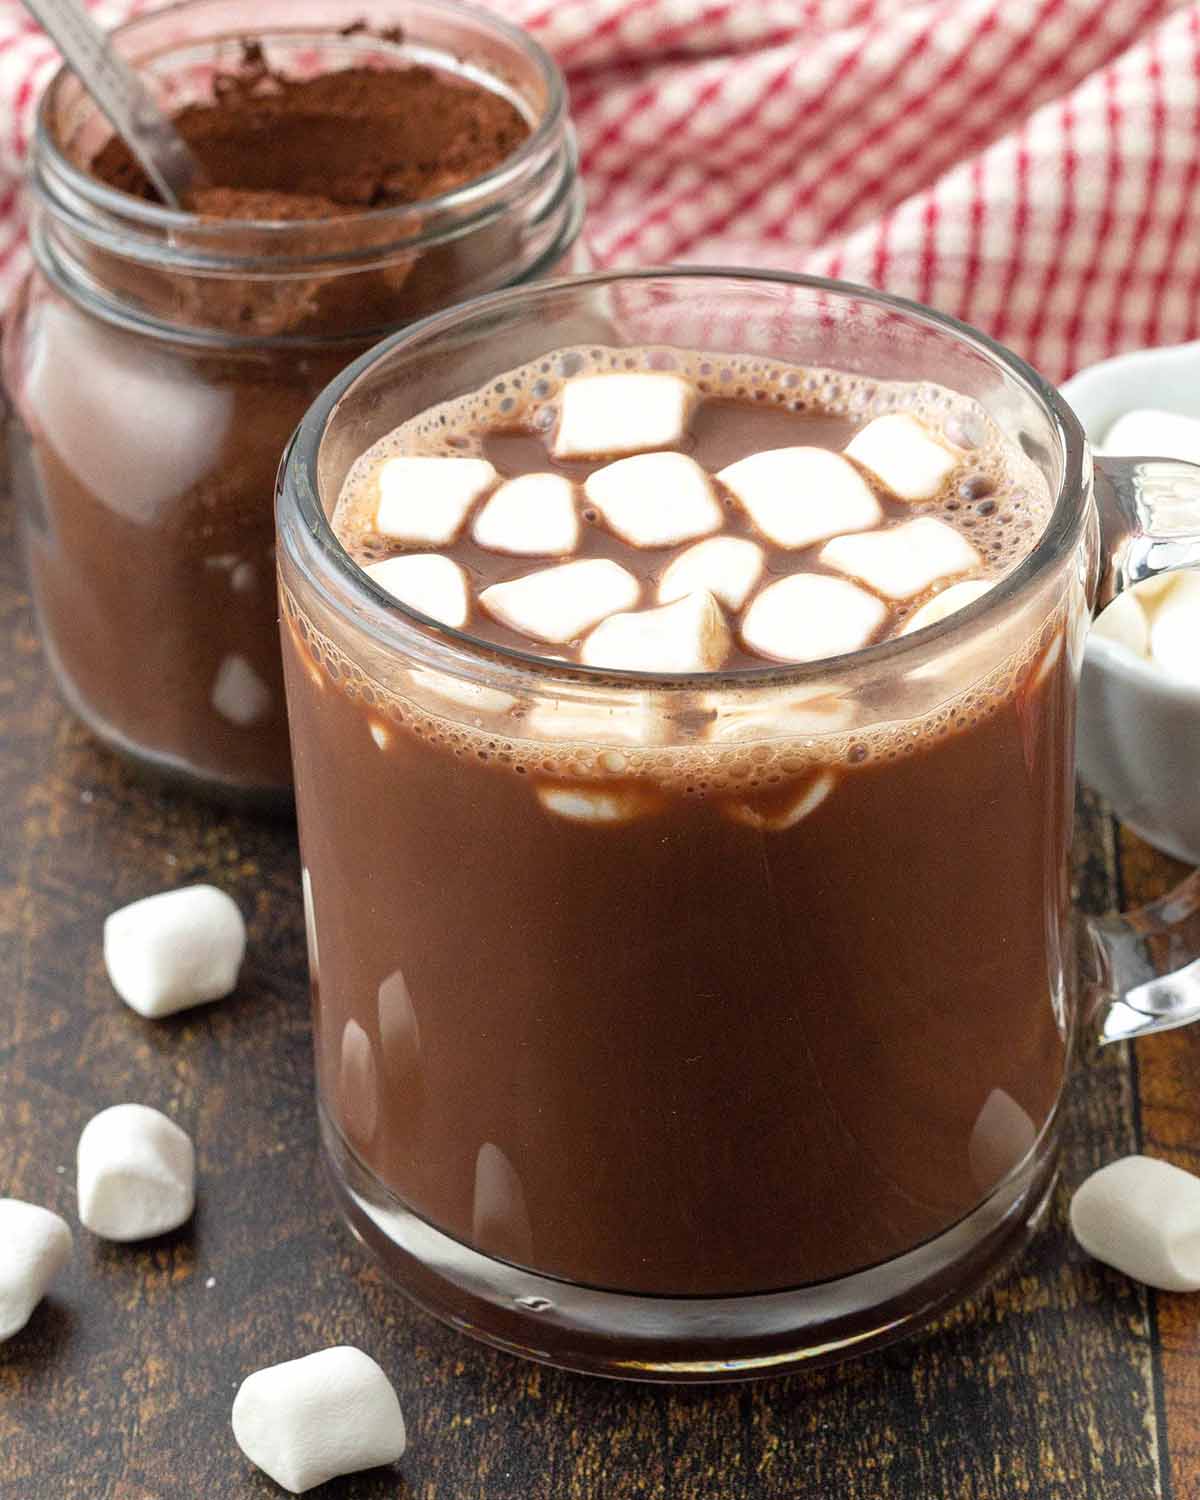 A glass mug filled with hot chocolate topped with marshmallows.